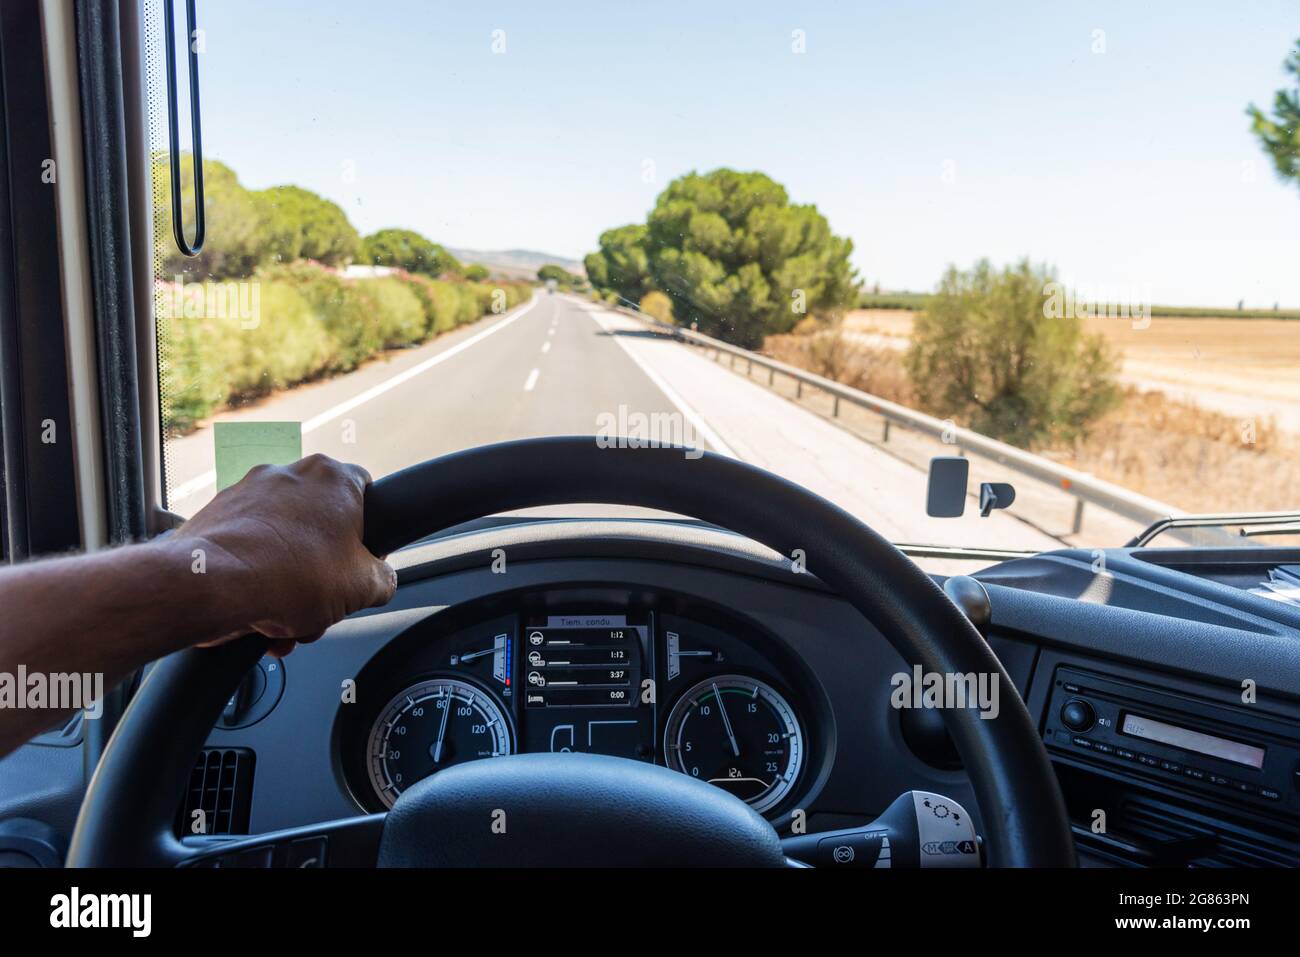 View that a truck driver has from his workplace, with one hand gripping the steering wheel, the dashboard with job information and the road in the bac Stock Photo